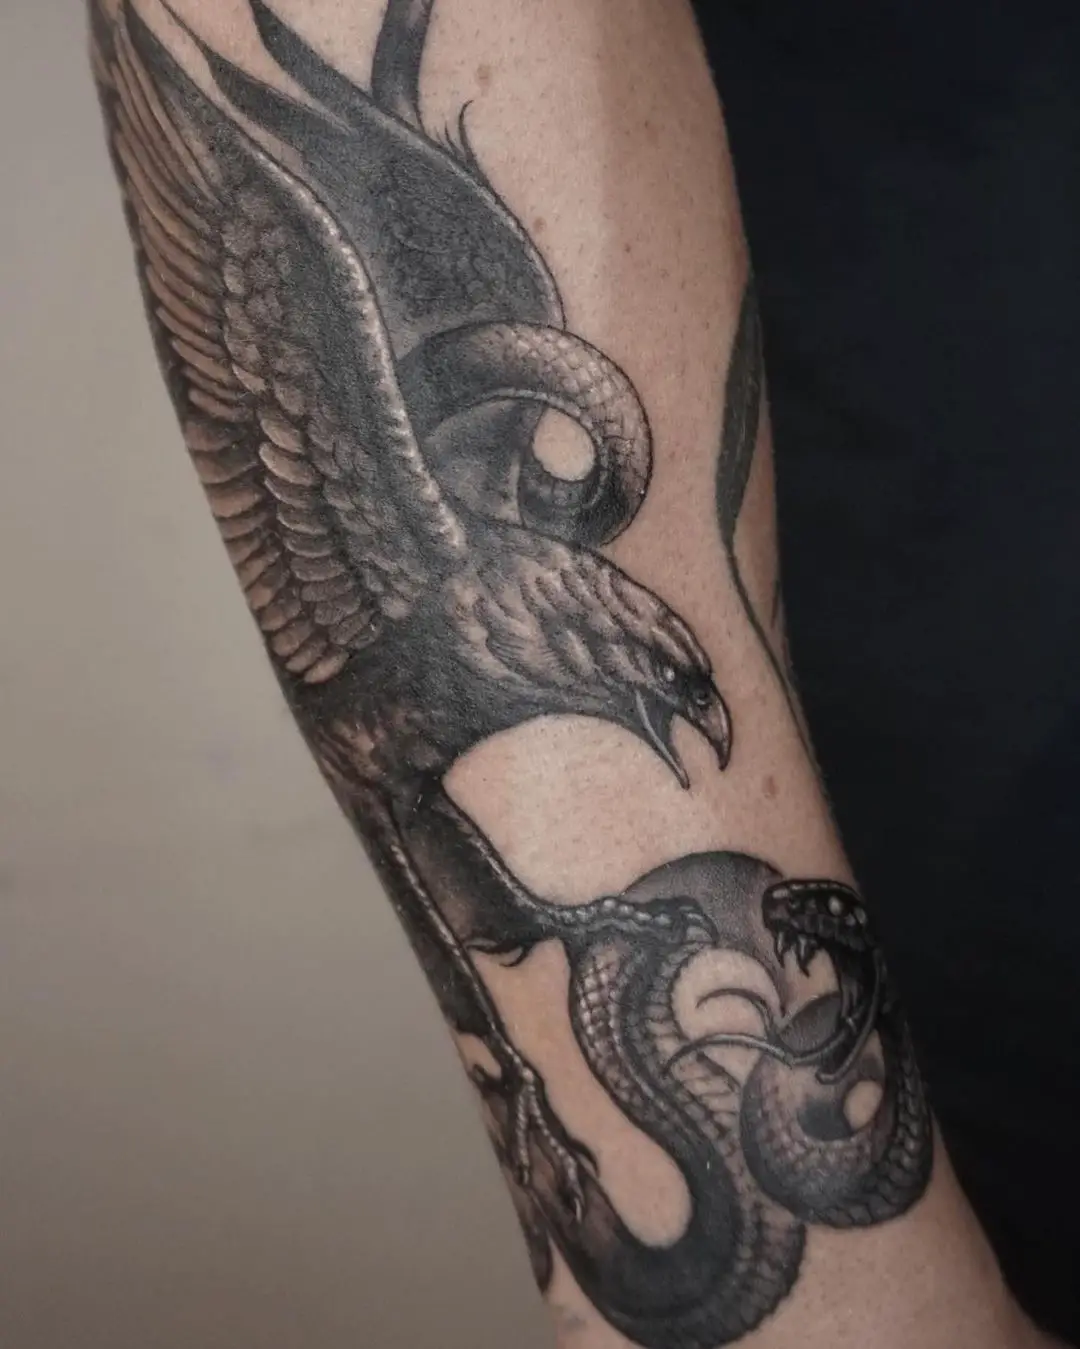 Eagle with snake tattoo by hodu blk